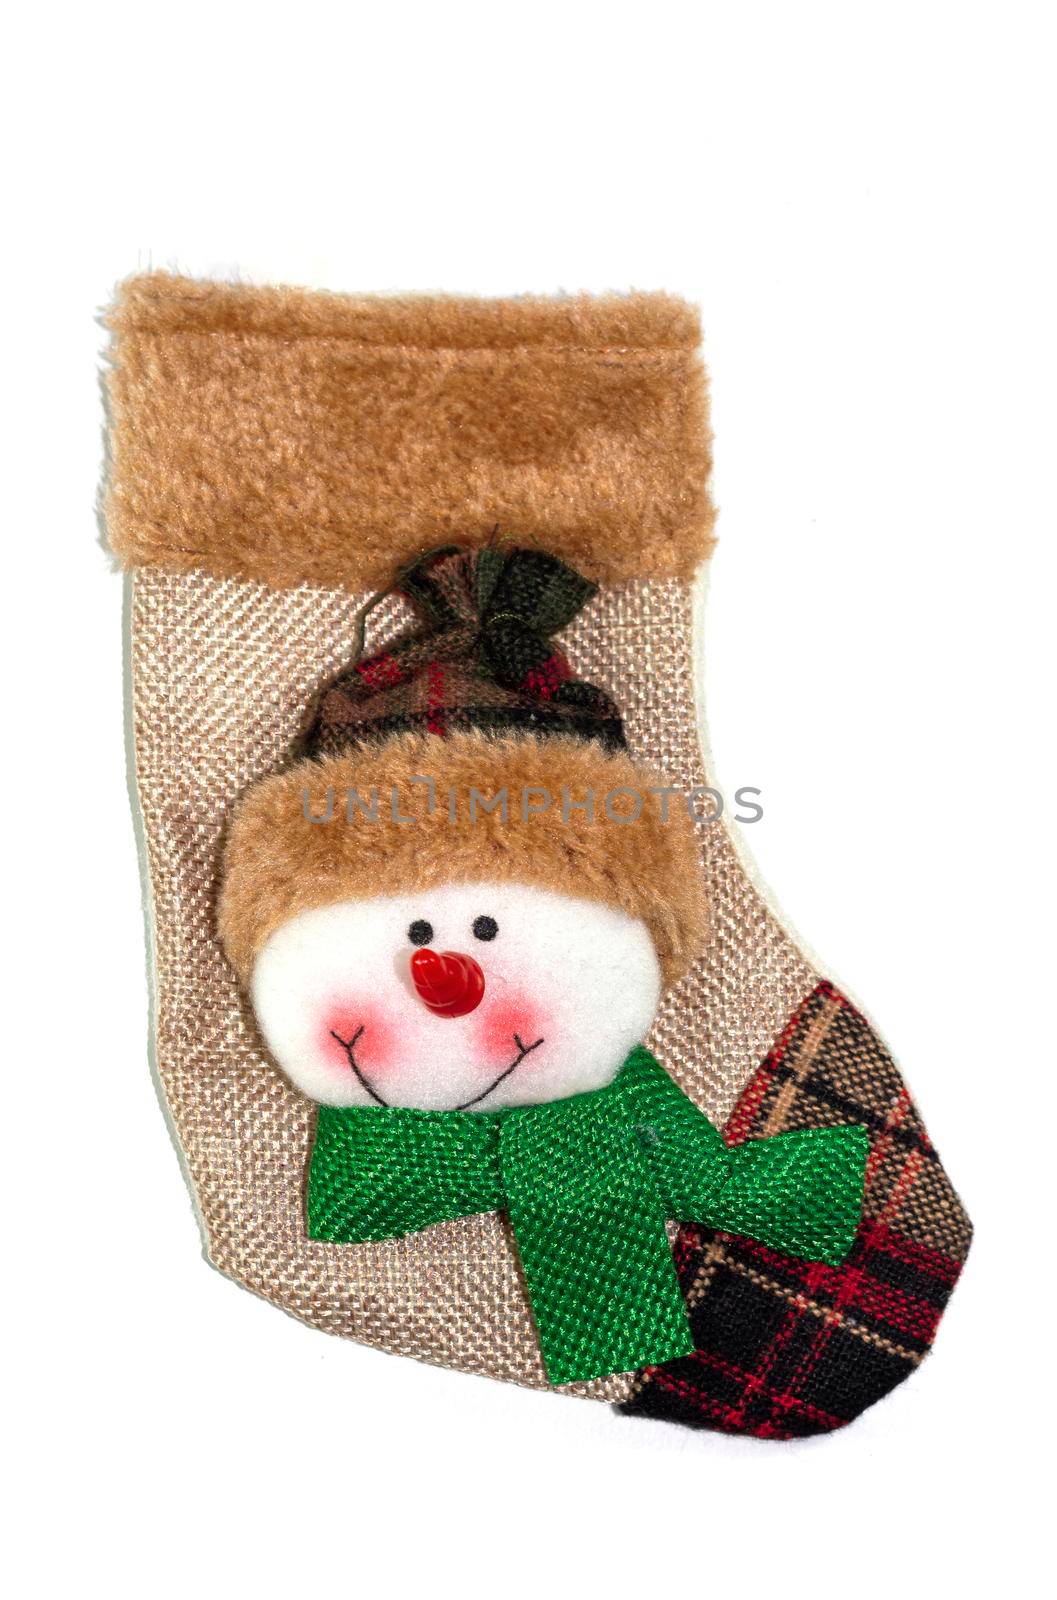 Happy snowman on a sock by bybyphotography